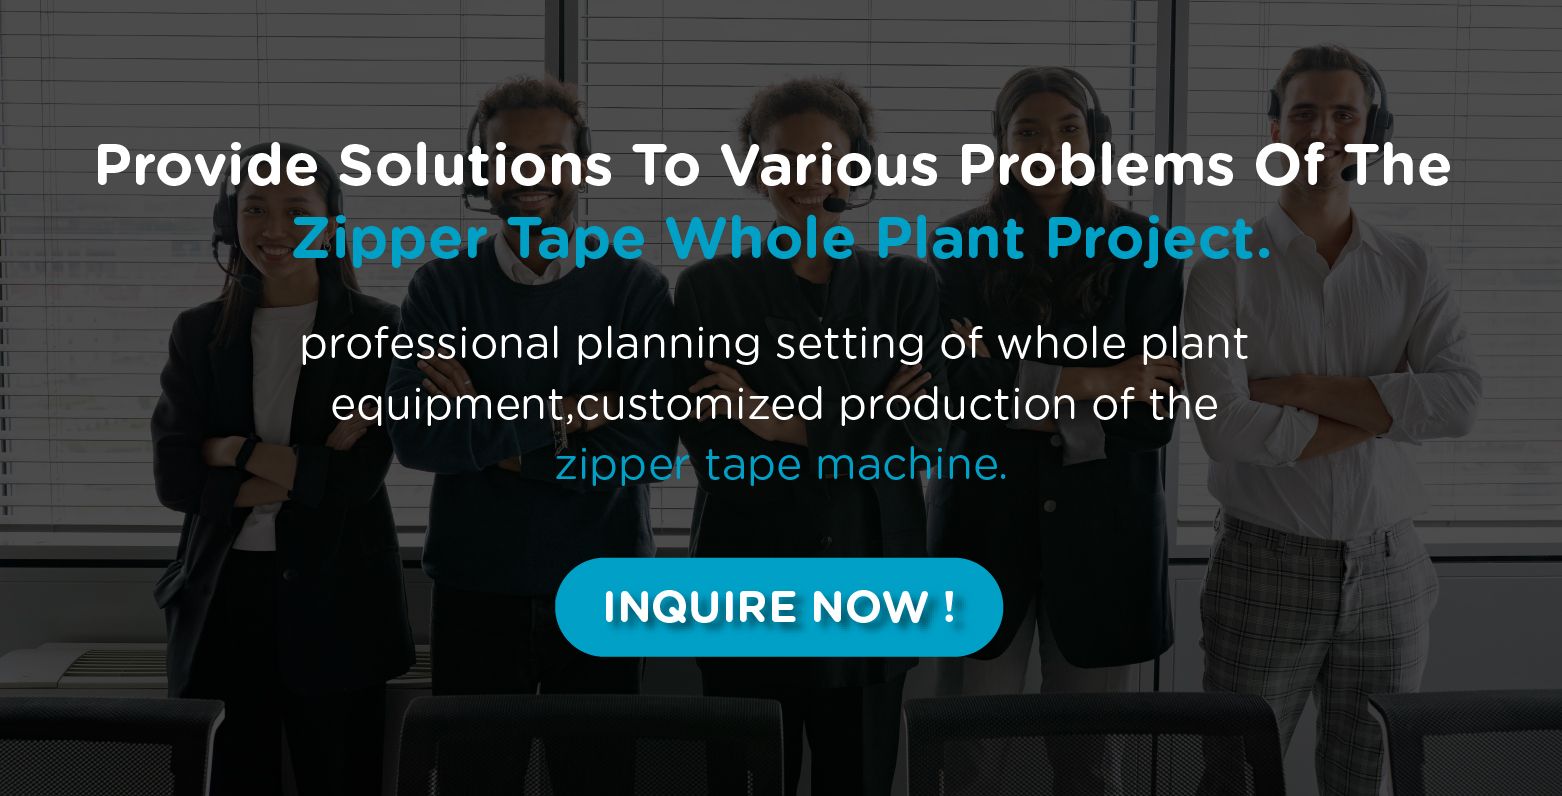 Kyang Yhe Provides You With Solutions For The Production Of Zipper Tape In All Aspects!